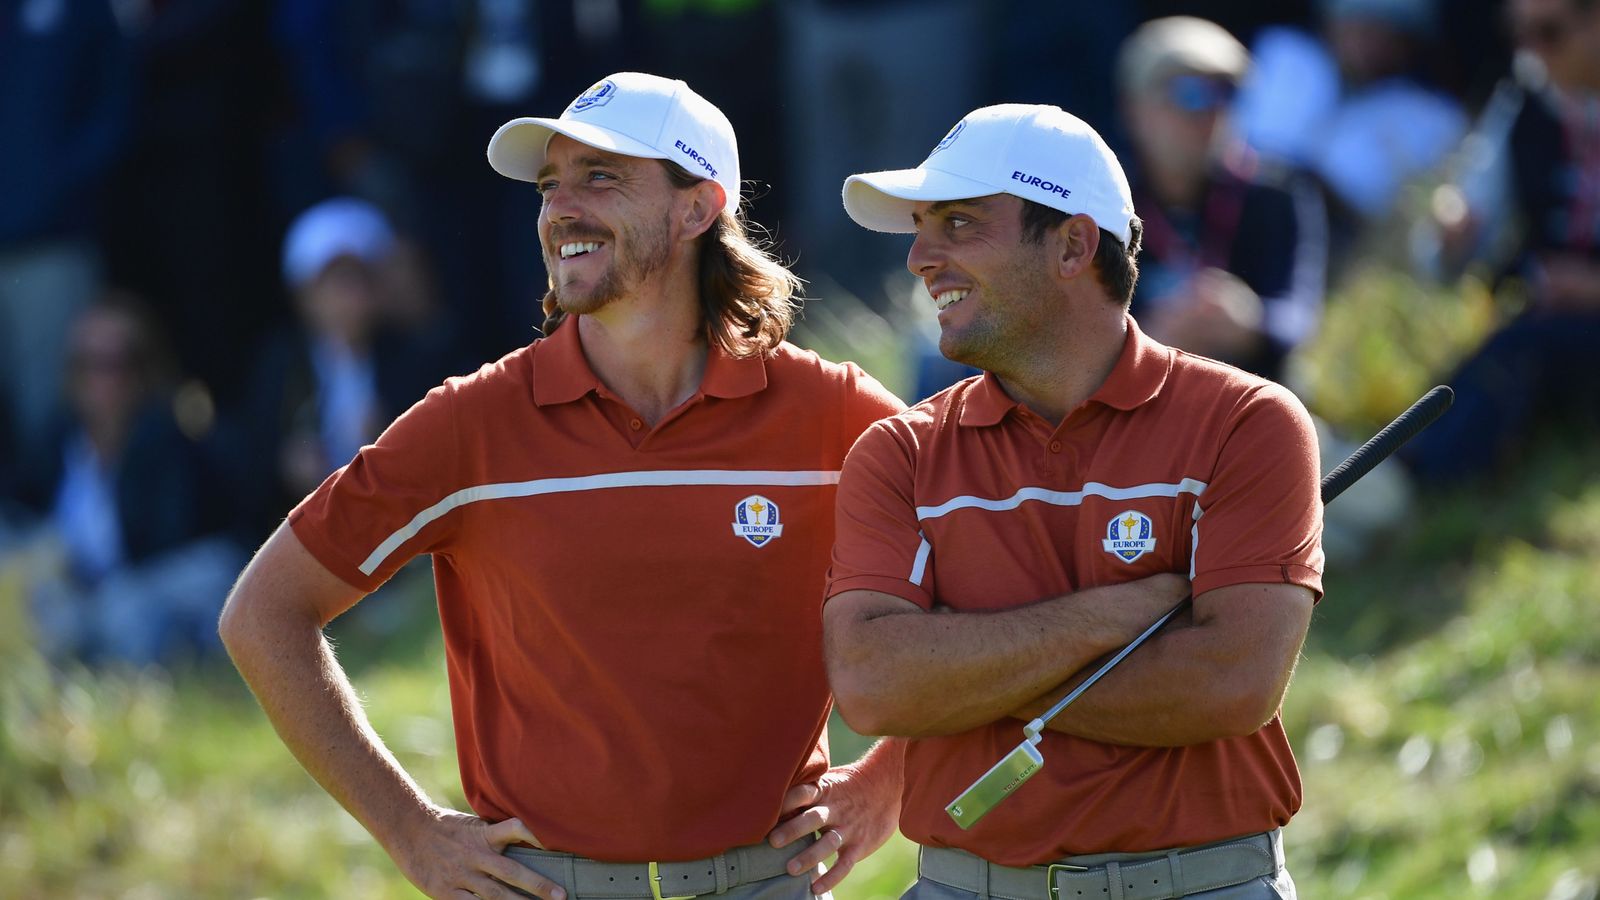 Ryder Cup Records tumble as Europe open up fourpoint lead Golf News